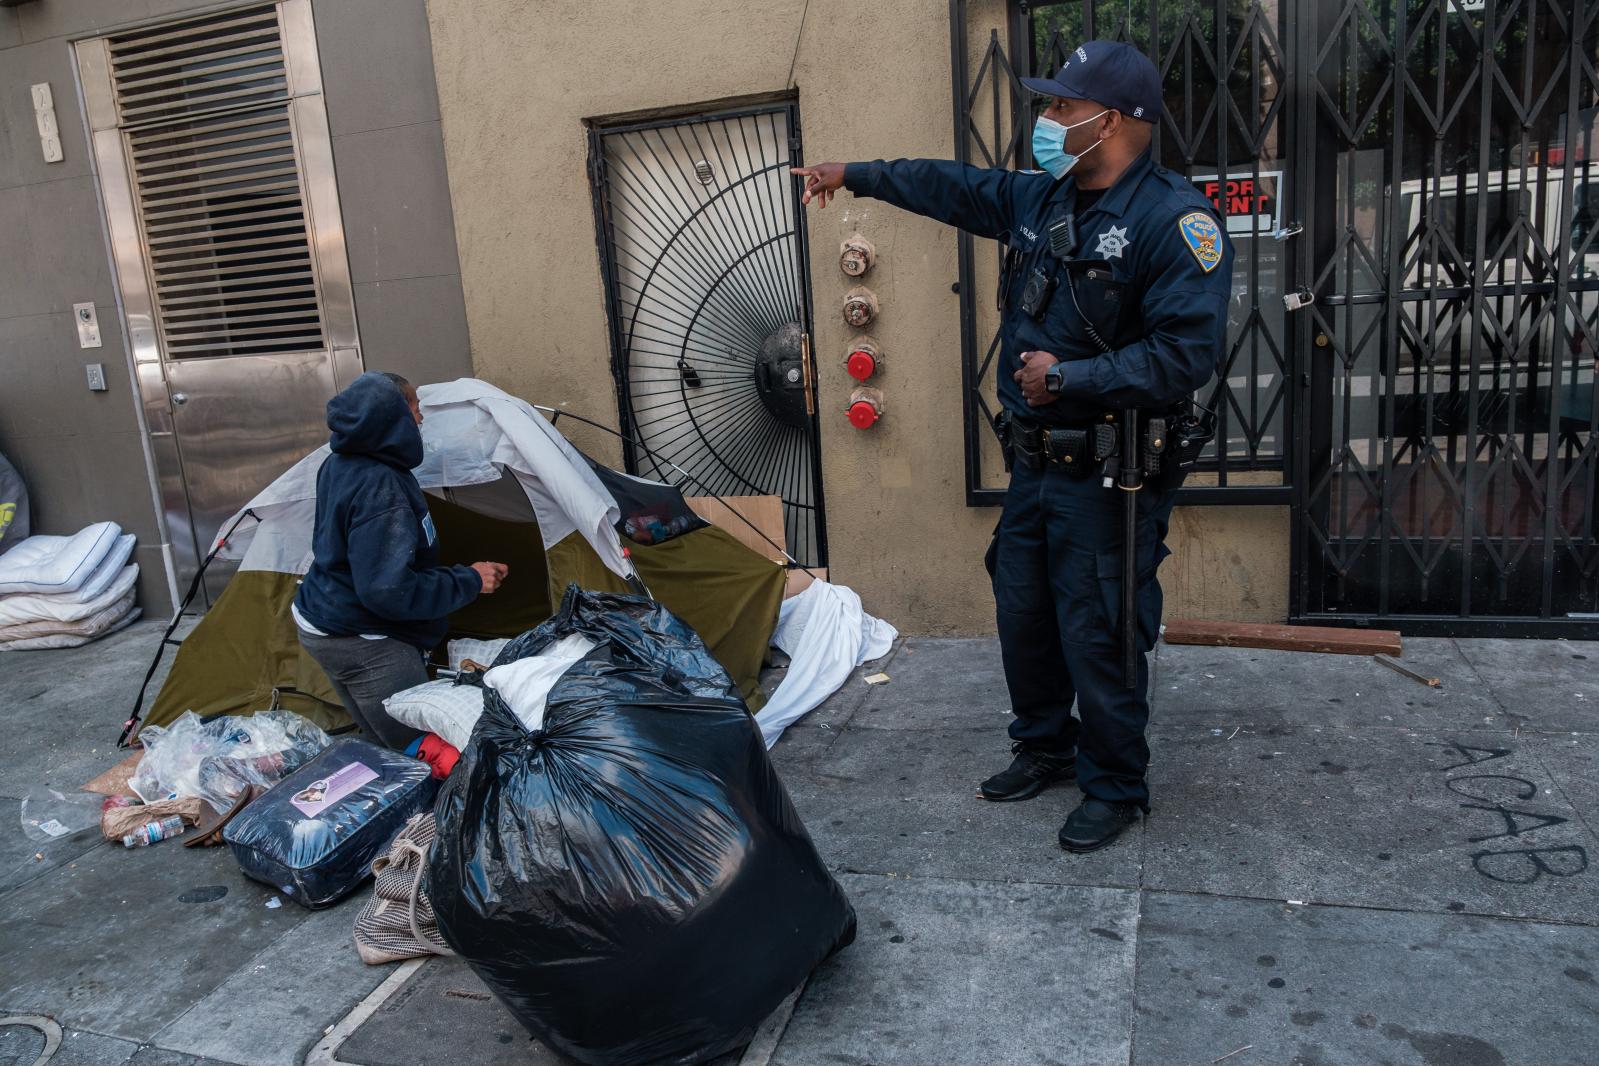 Image from San Francisco's Housing Crisis - Officer B. Holbrook speaks to a woman staying in a small...